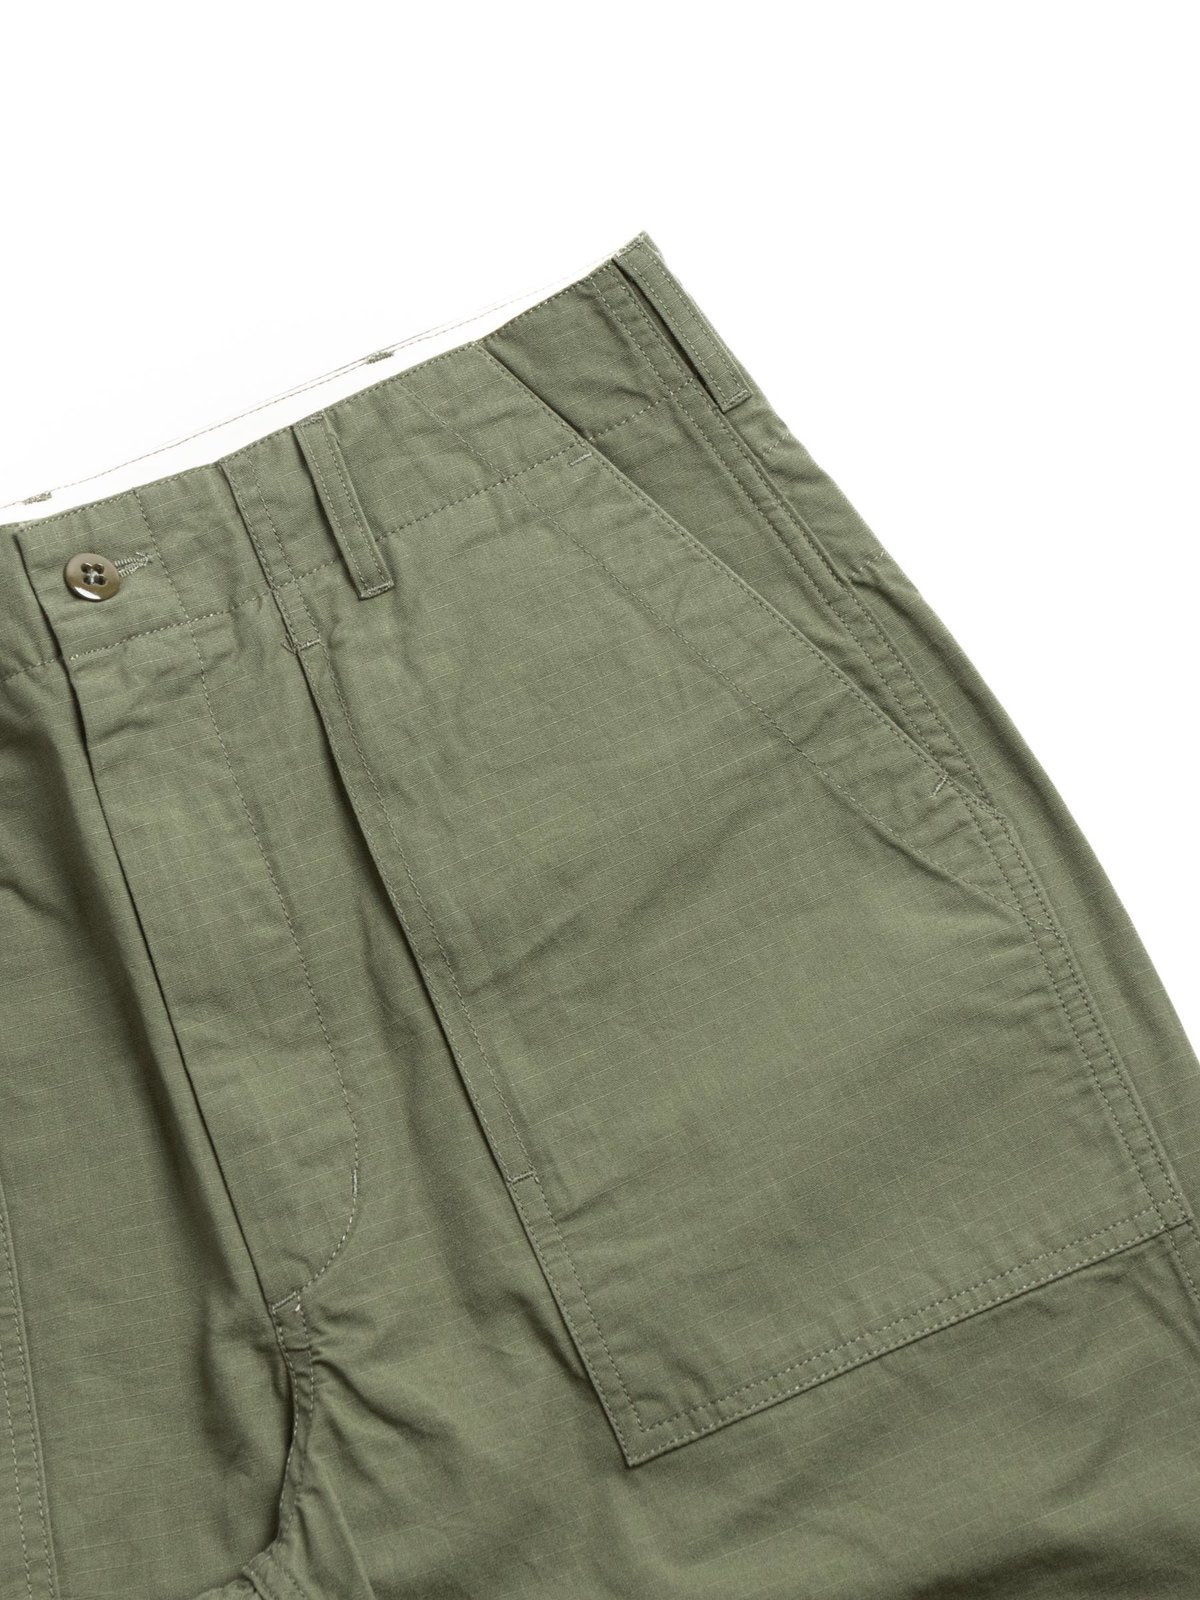 FATIGUE PANT OLIVE COTTON RIPSTOP - Image 2